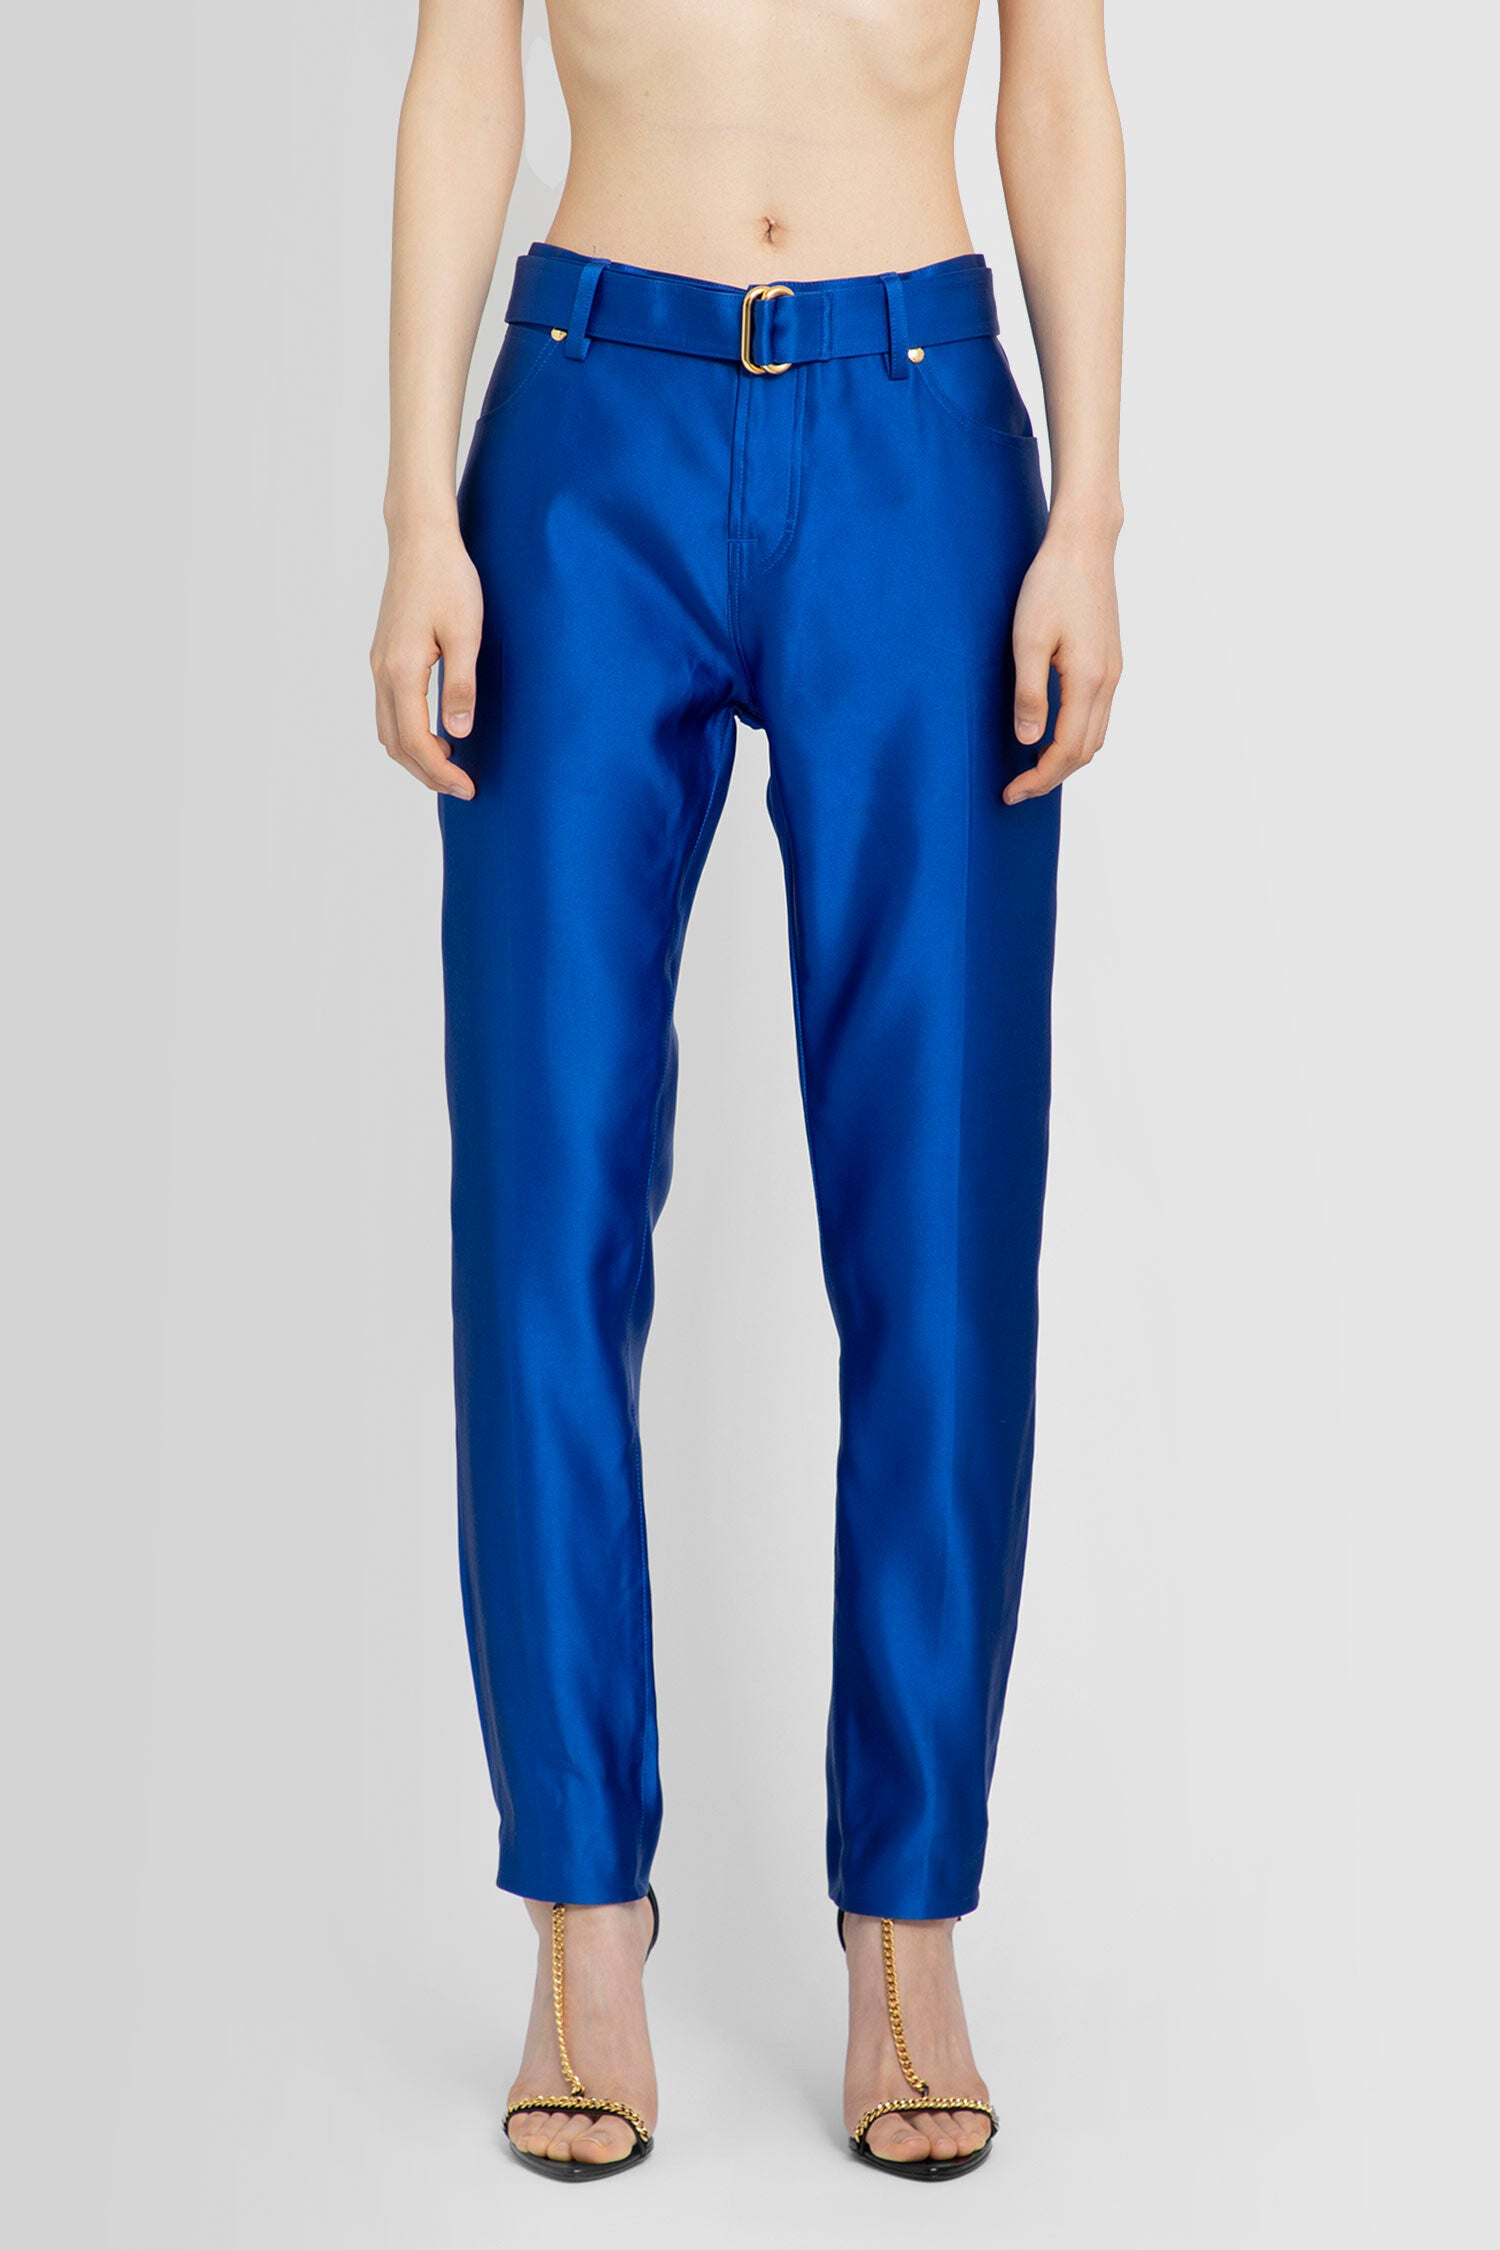 TOM FORD WOMAN BLUE TROUSERS